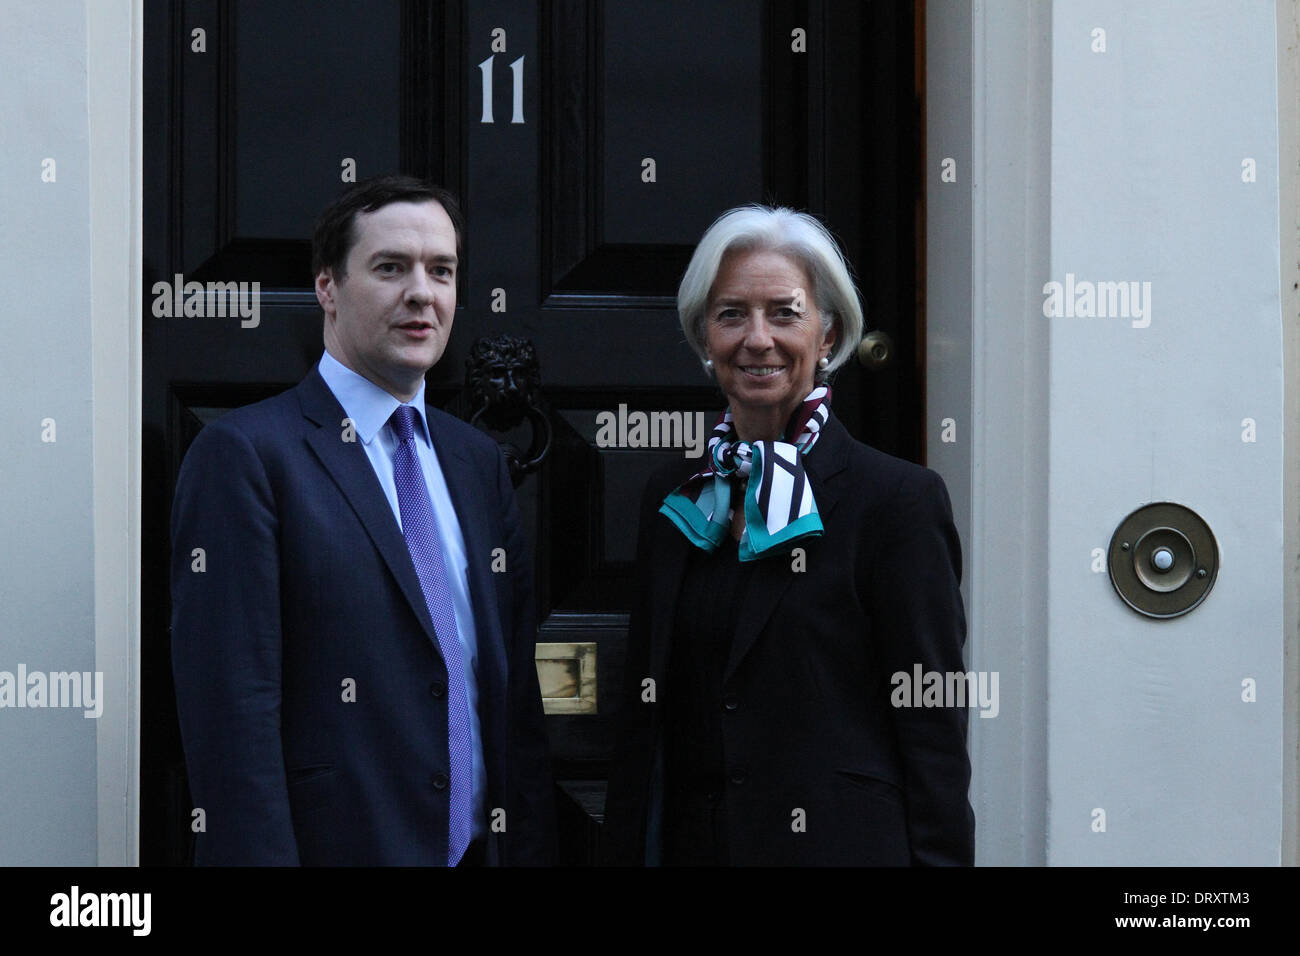 London, UK, 4th February 2014. Chancellor George Osborne meets the Head of the IMF, Christine Lagarde seen at Downing Street, We Stock Photo